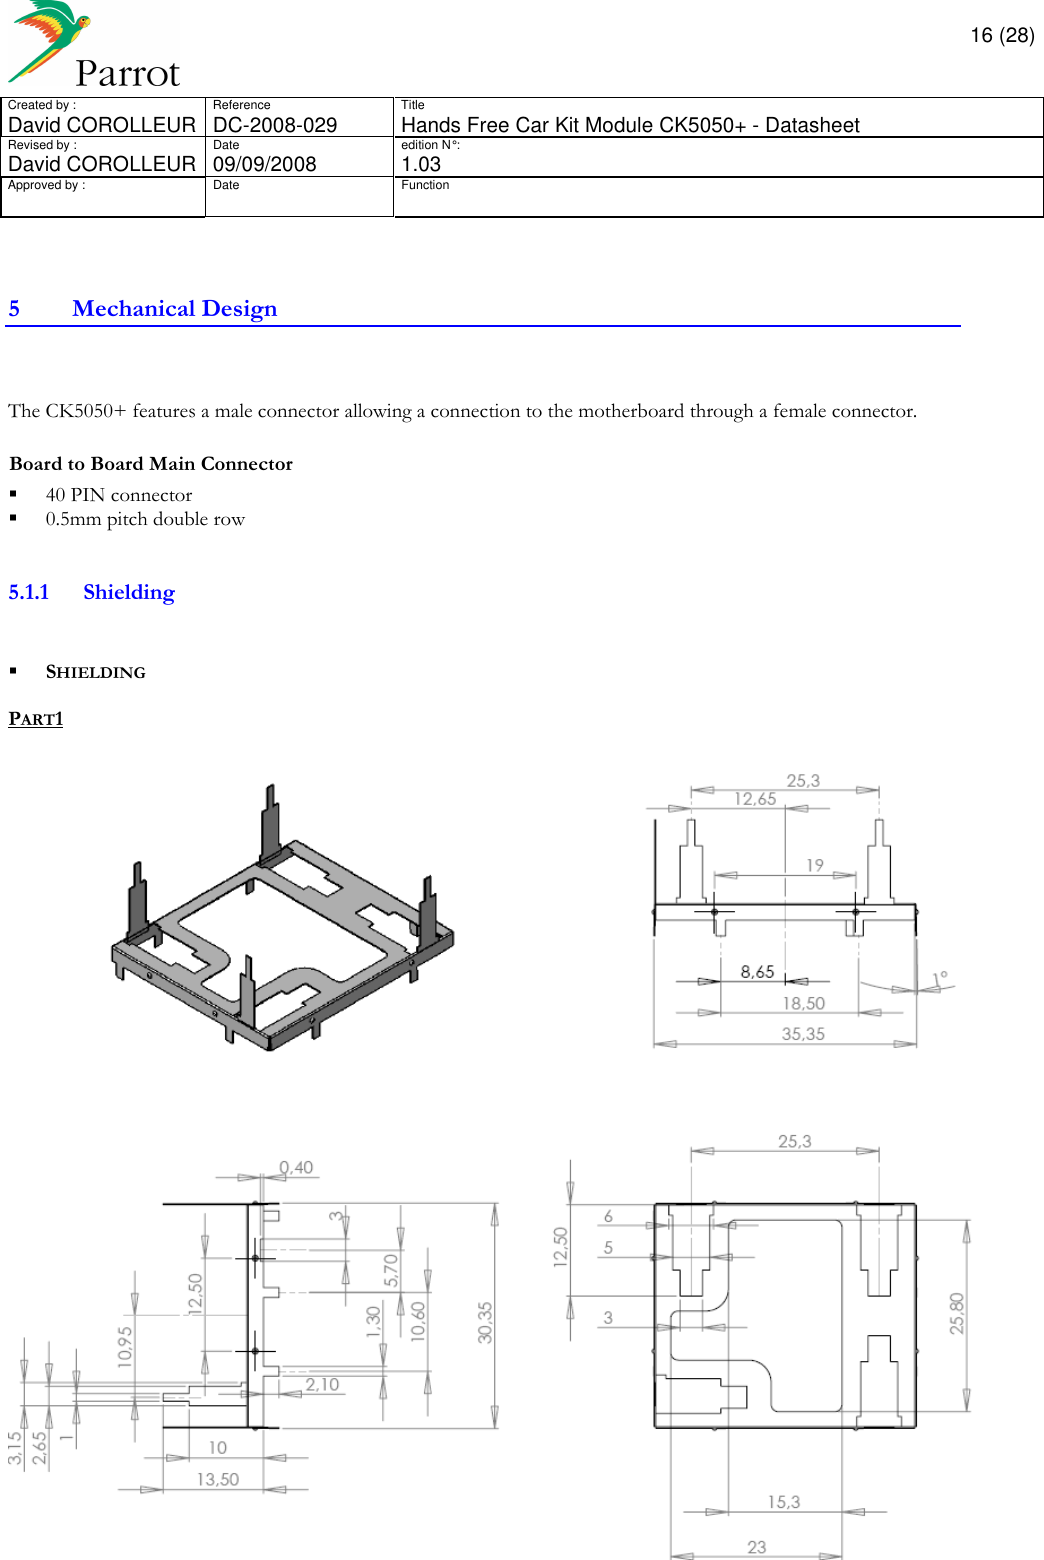       16 (28) Created by :  Reference  Title David COROLLEUR  DC-2008-029  Hands Free Car Kit Module CK5050+ - Datasheet  Revised by :  Date  edition N° :  David COROLLEUR 09/09/2008   1.03 Approved by :  Date  Function                  5 Mechanical Design   The CK5050+ features a male connector allowing a connection to the motherboard through a female connector.  Board to Board Main Connector   40 PIN connector   0.5mm pitch double row   5.1.1 Shielding     SHIELDING  PART1   